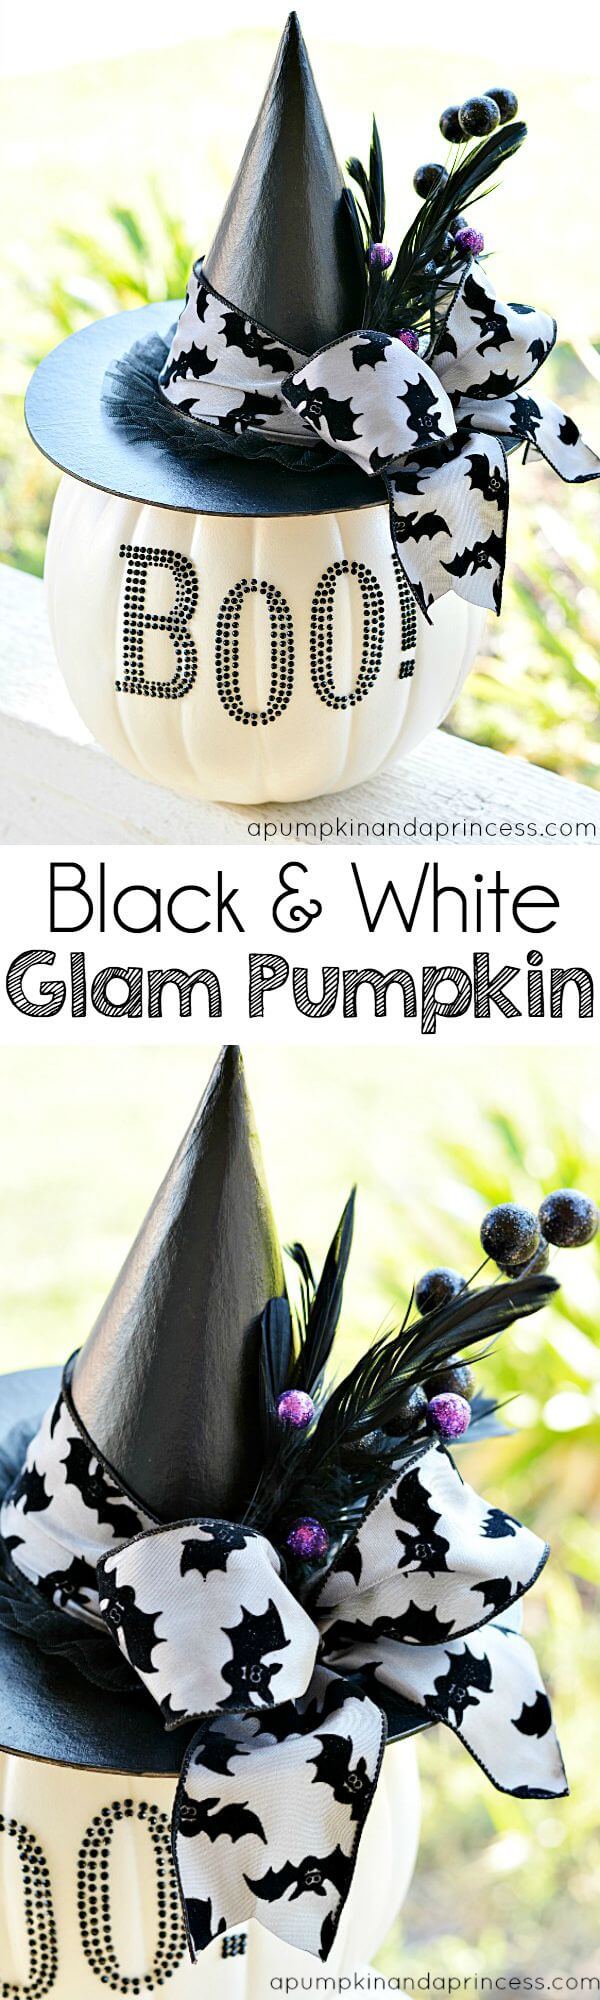 9 black and white halloween decorations farmfoodfamily